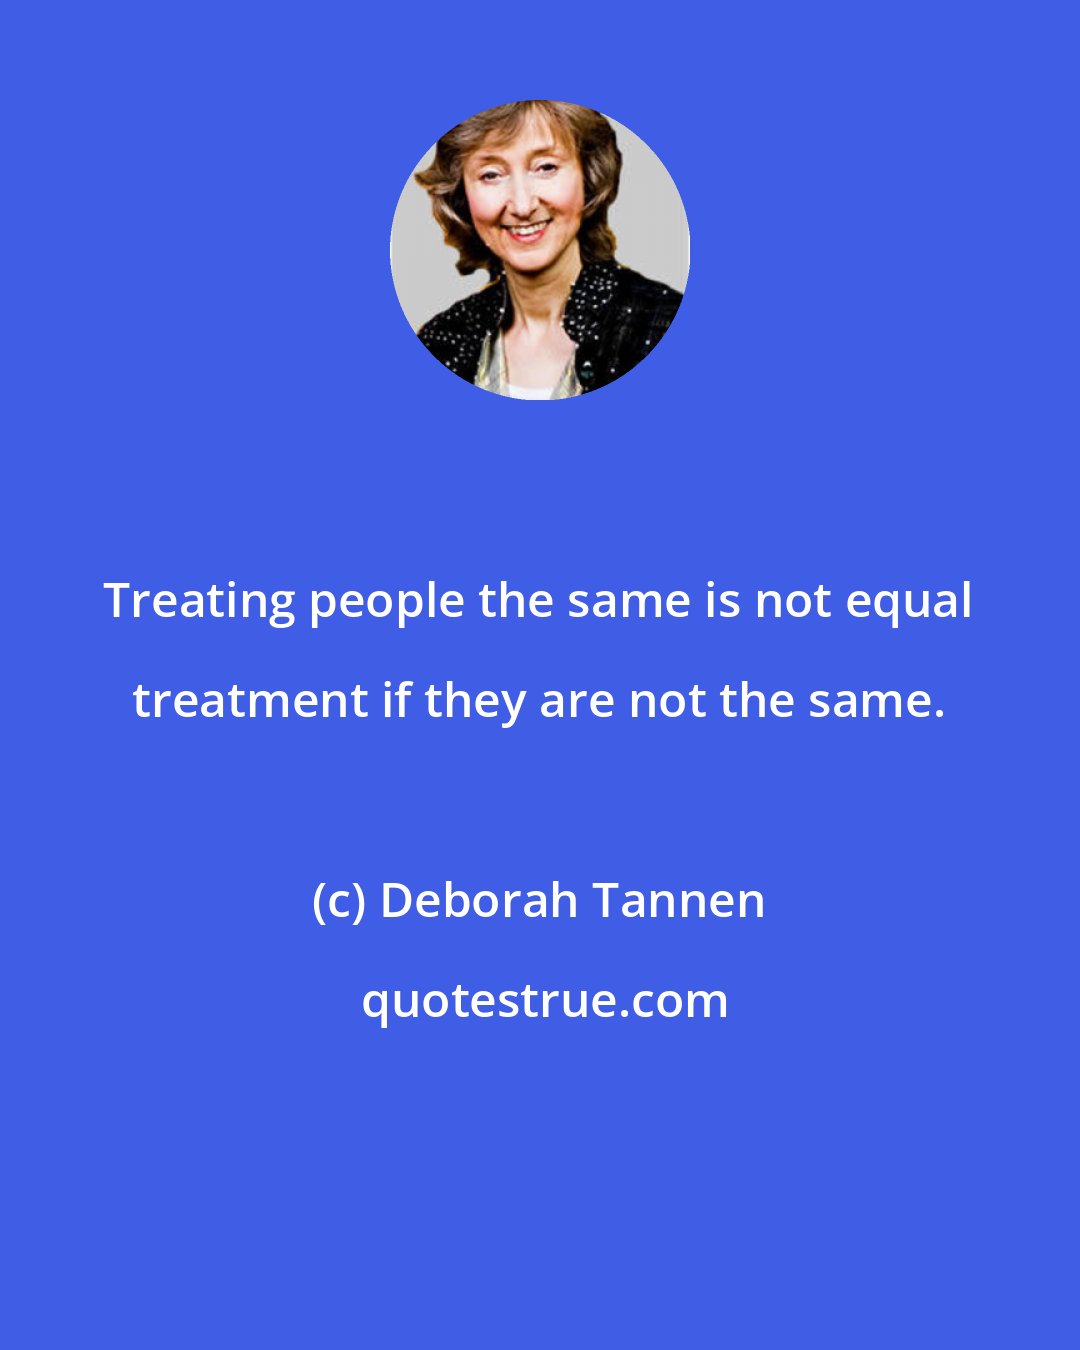 Deborah Tannen: Treating people the same is not equal treatment if they are not the same.